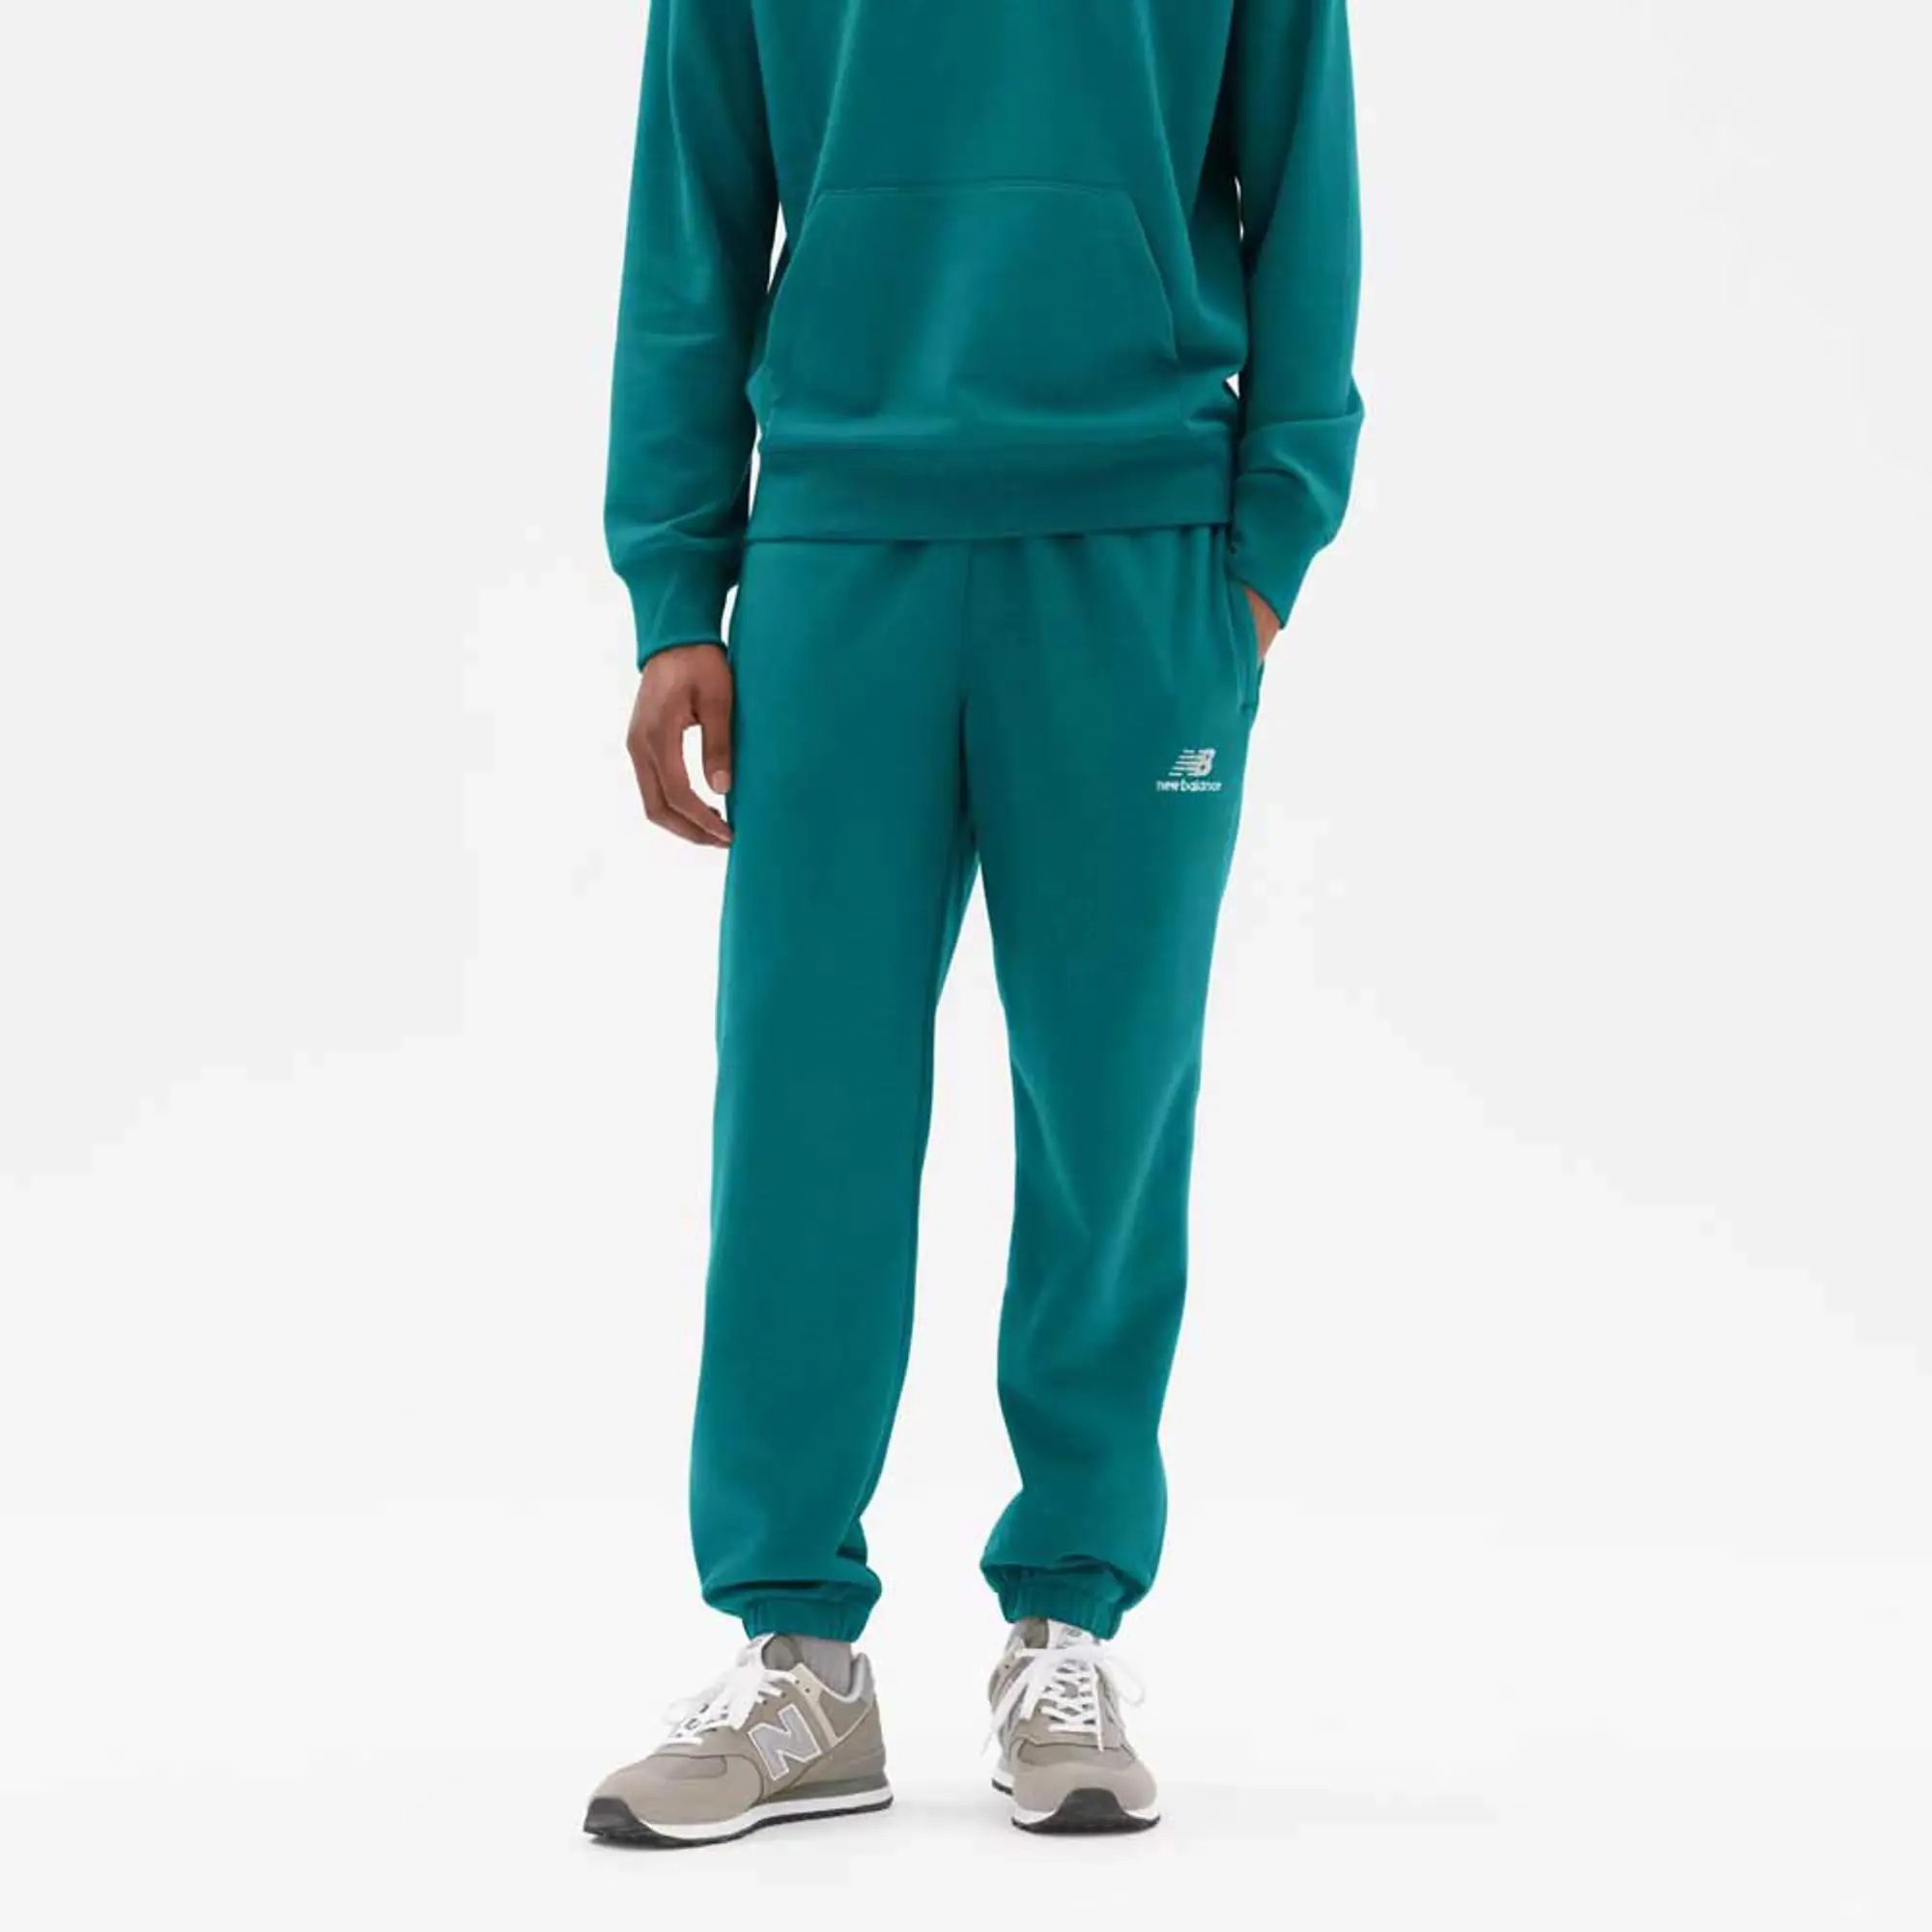 New Balance Uni-ssentials French Terry Sweatpants - Green, Green